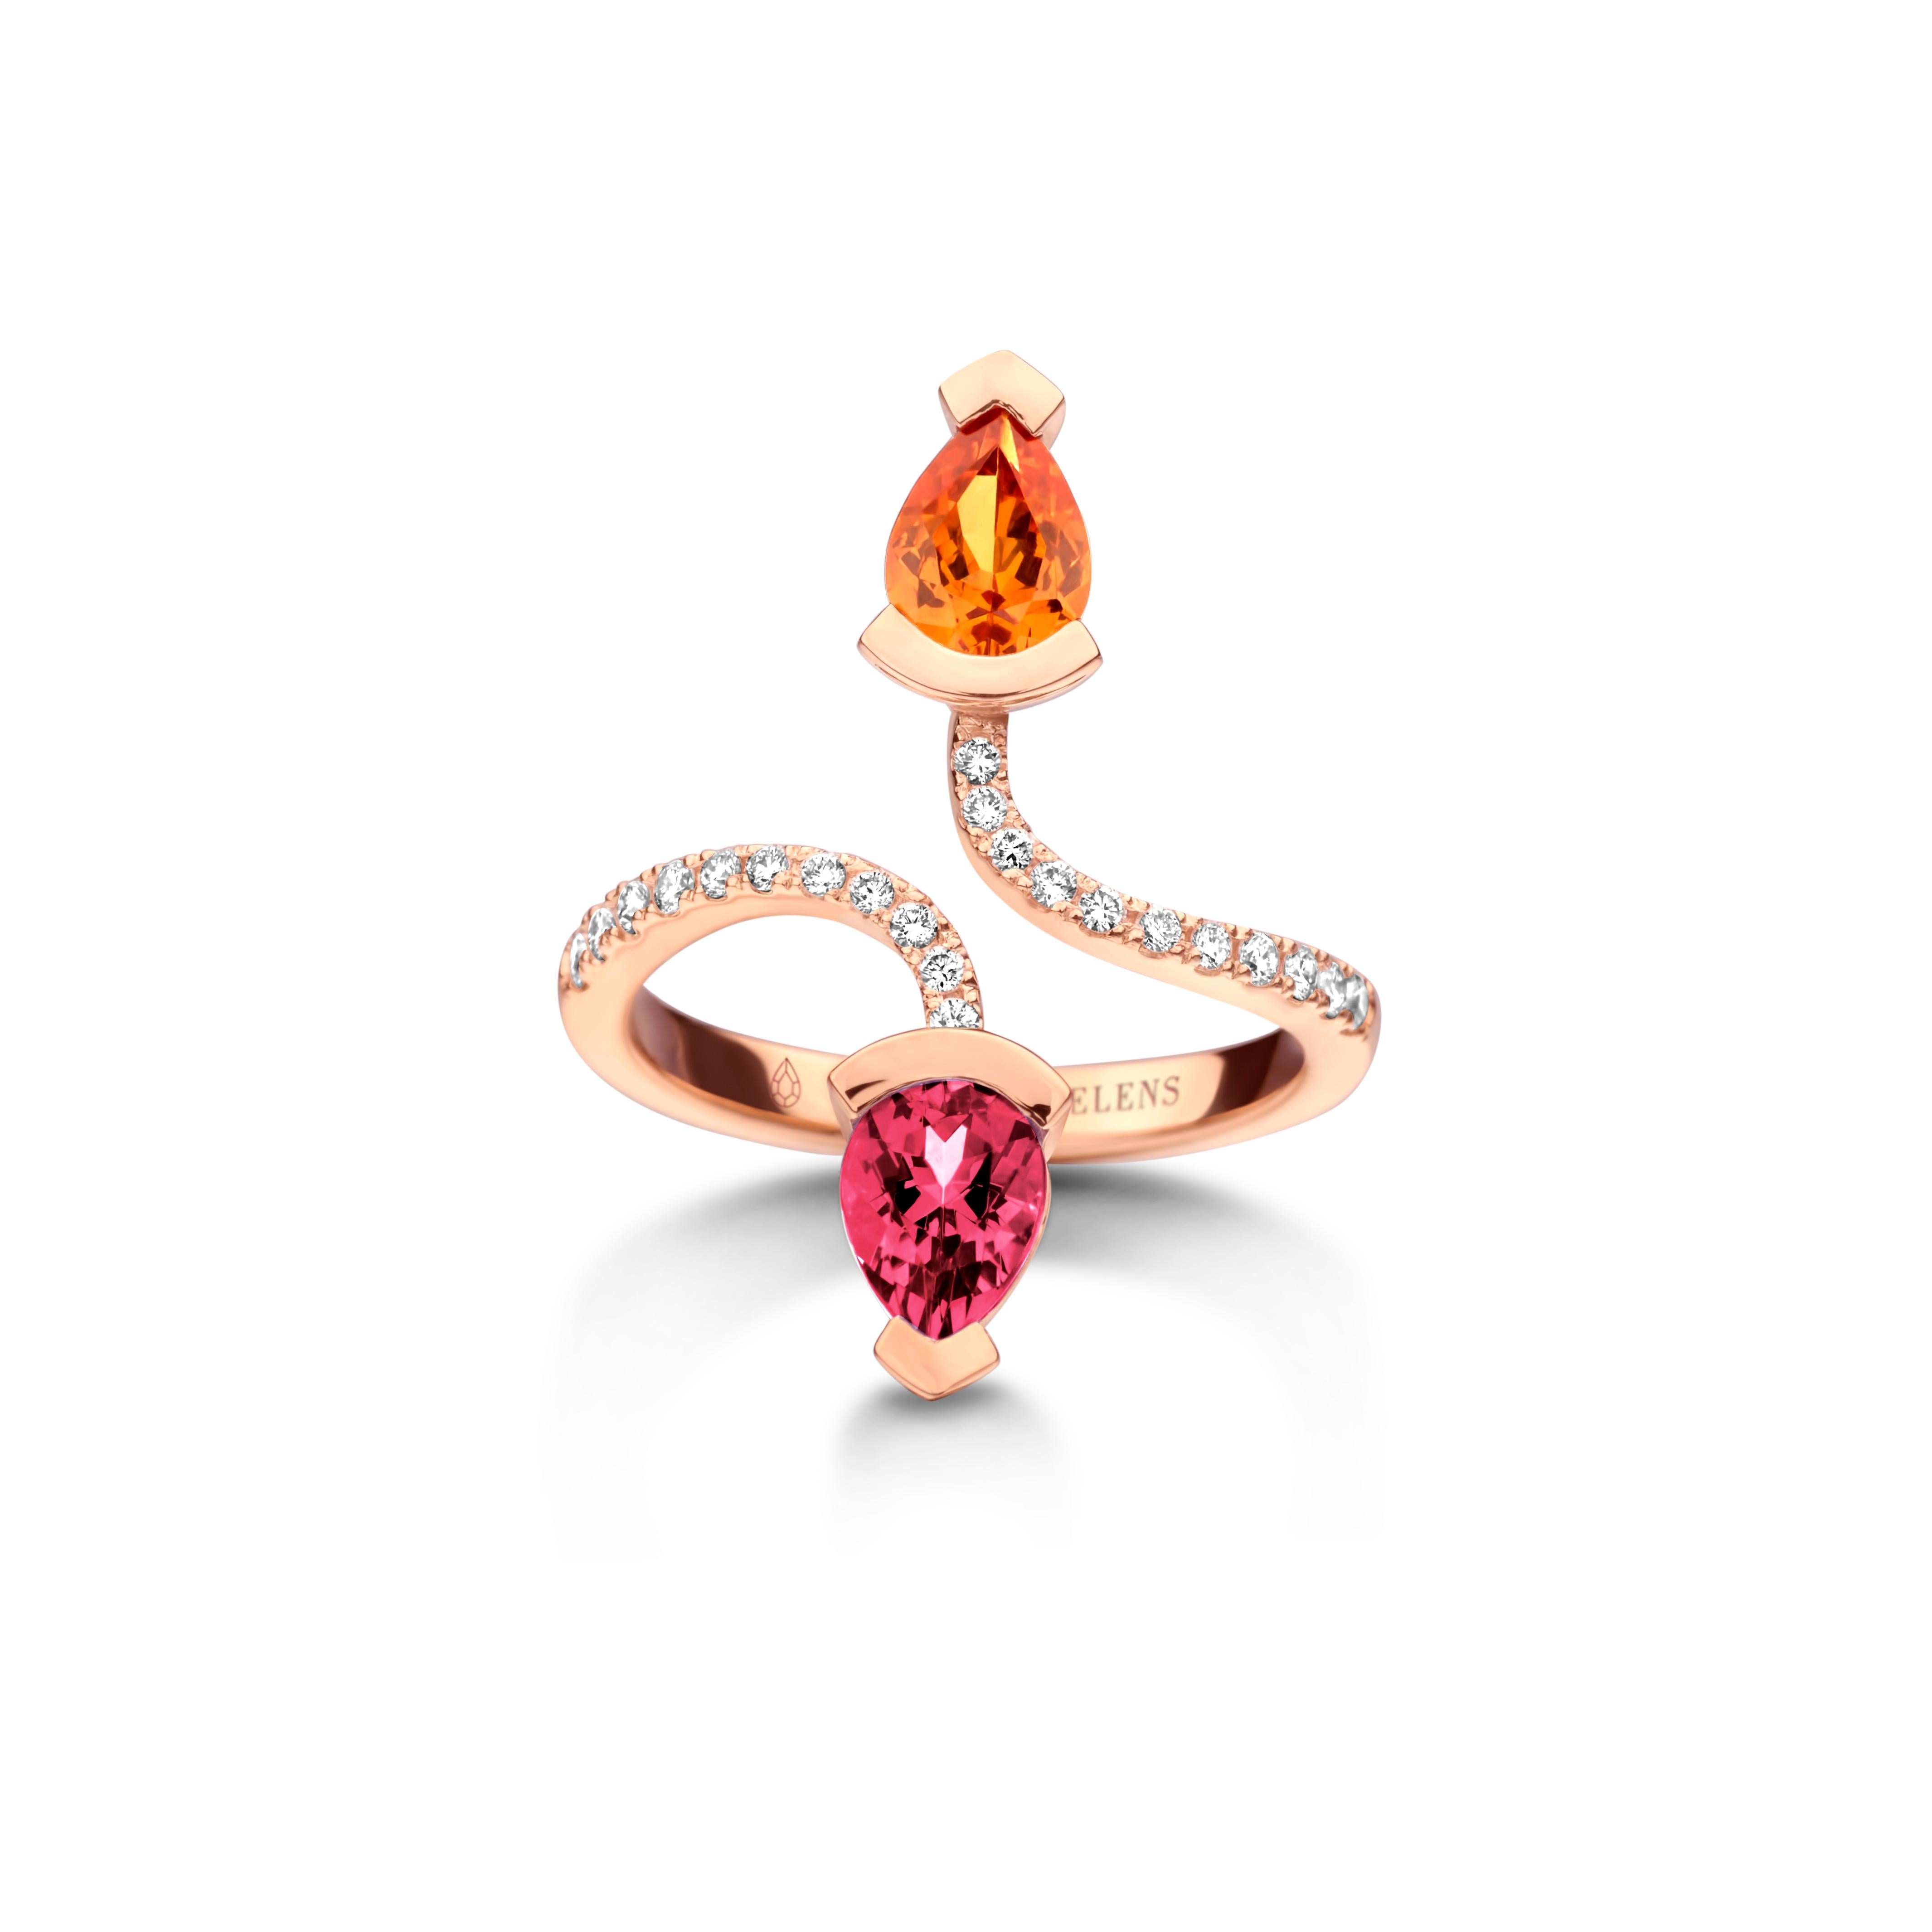 Adeline Duo ring in 18Kt yellow gold 5g set with a pear-shaped mandarin garnet 0,70 Ct, a pear-shaped Rubellite 0,70 Ct and 0,19 Ct of white brilliant cut diamonds - VS F quality. Celine Roelens, a goldsmith and gemologist, is specialized in unique,